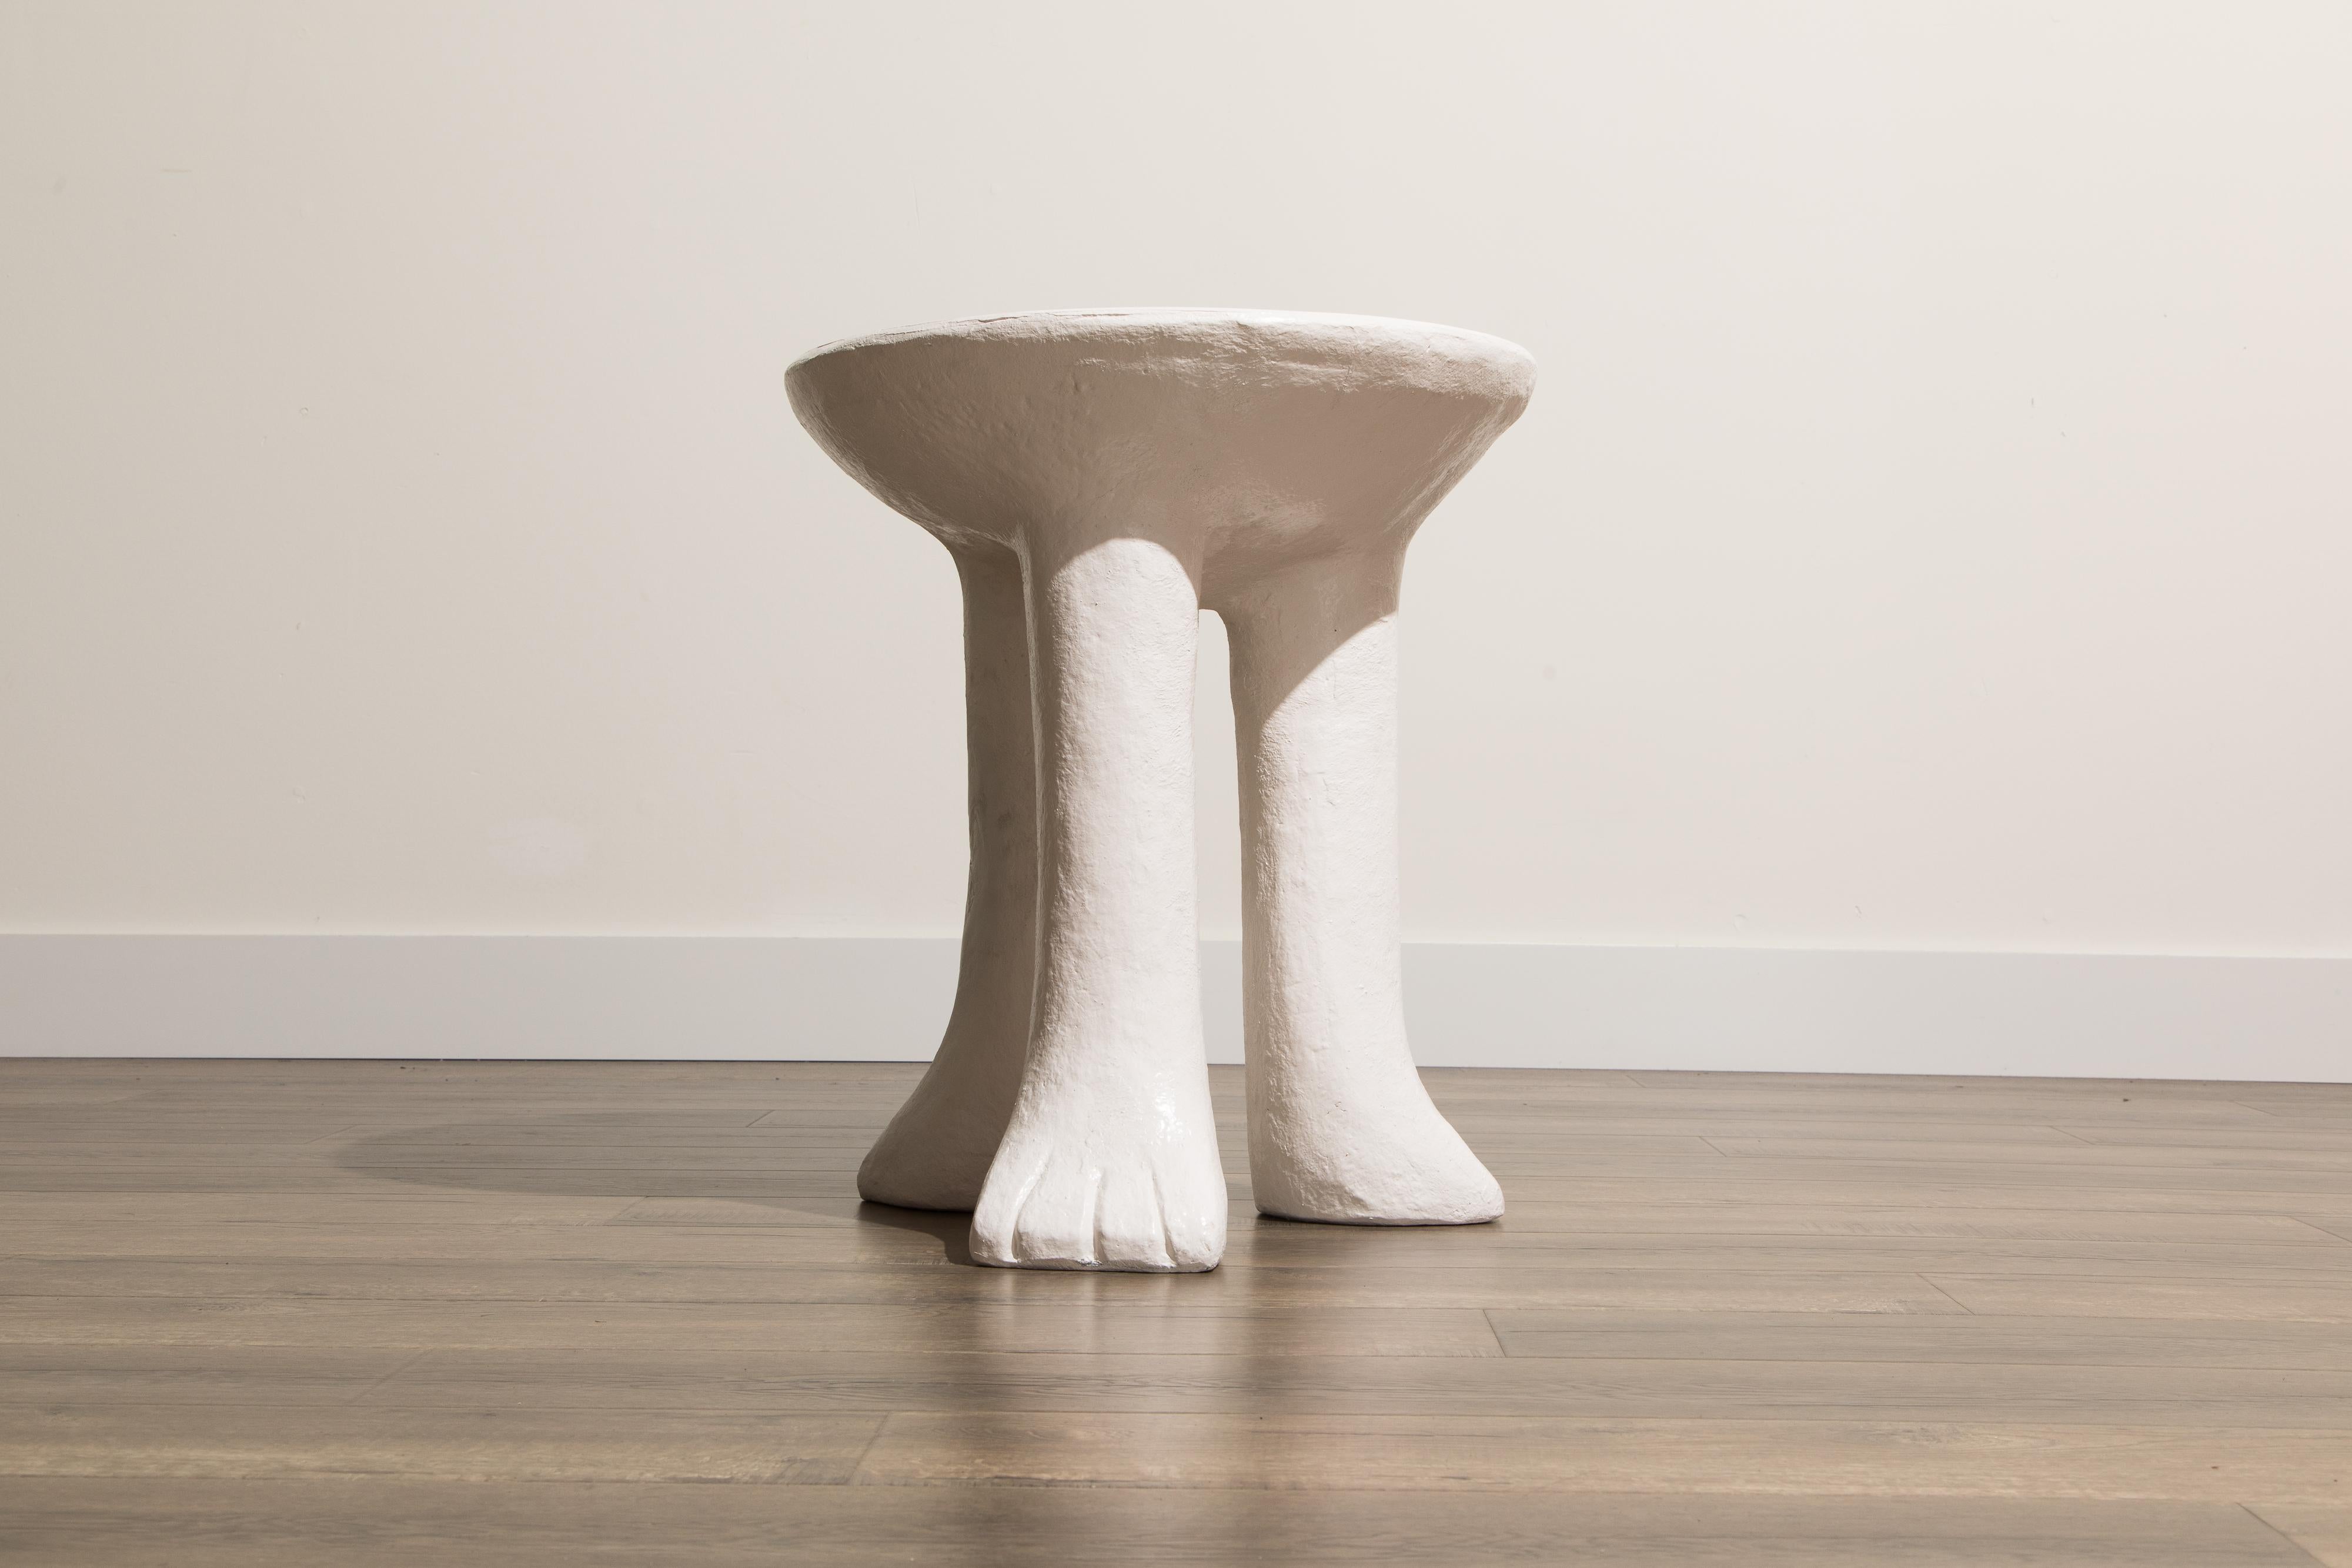 This attractive three-legged side table in the style of John Dickinson's 